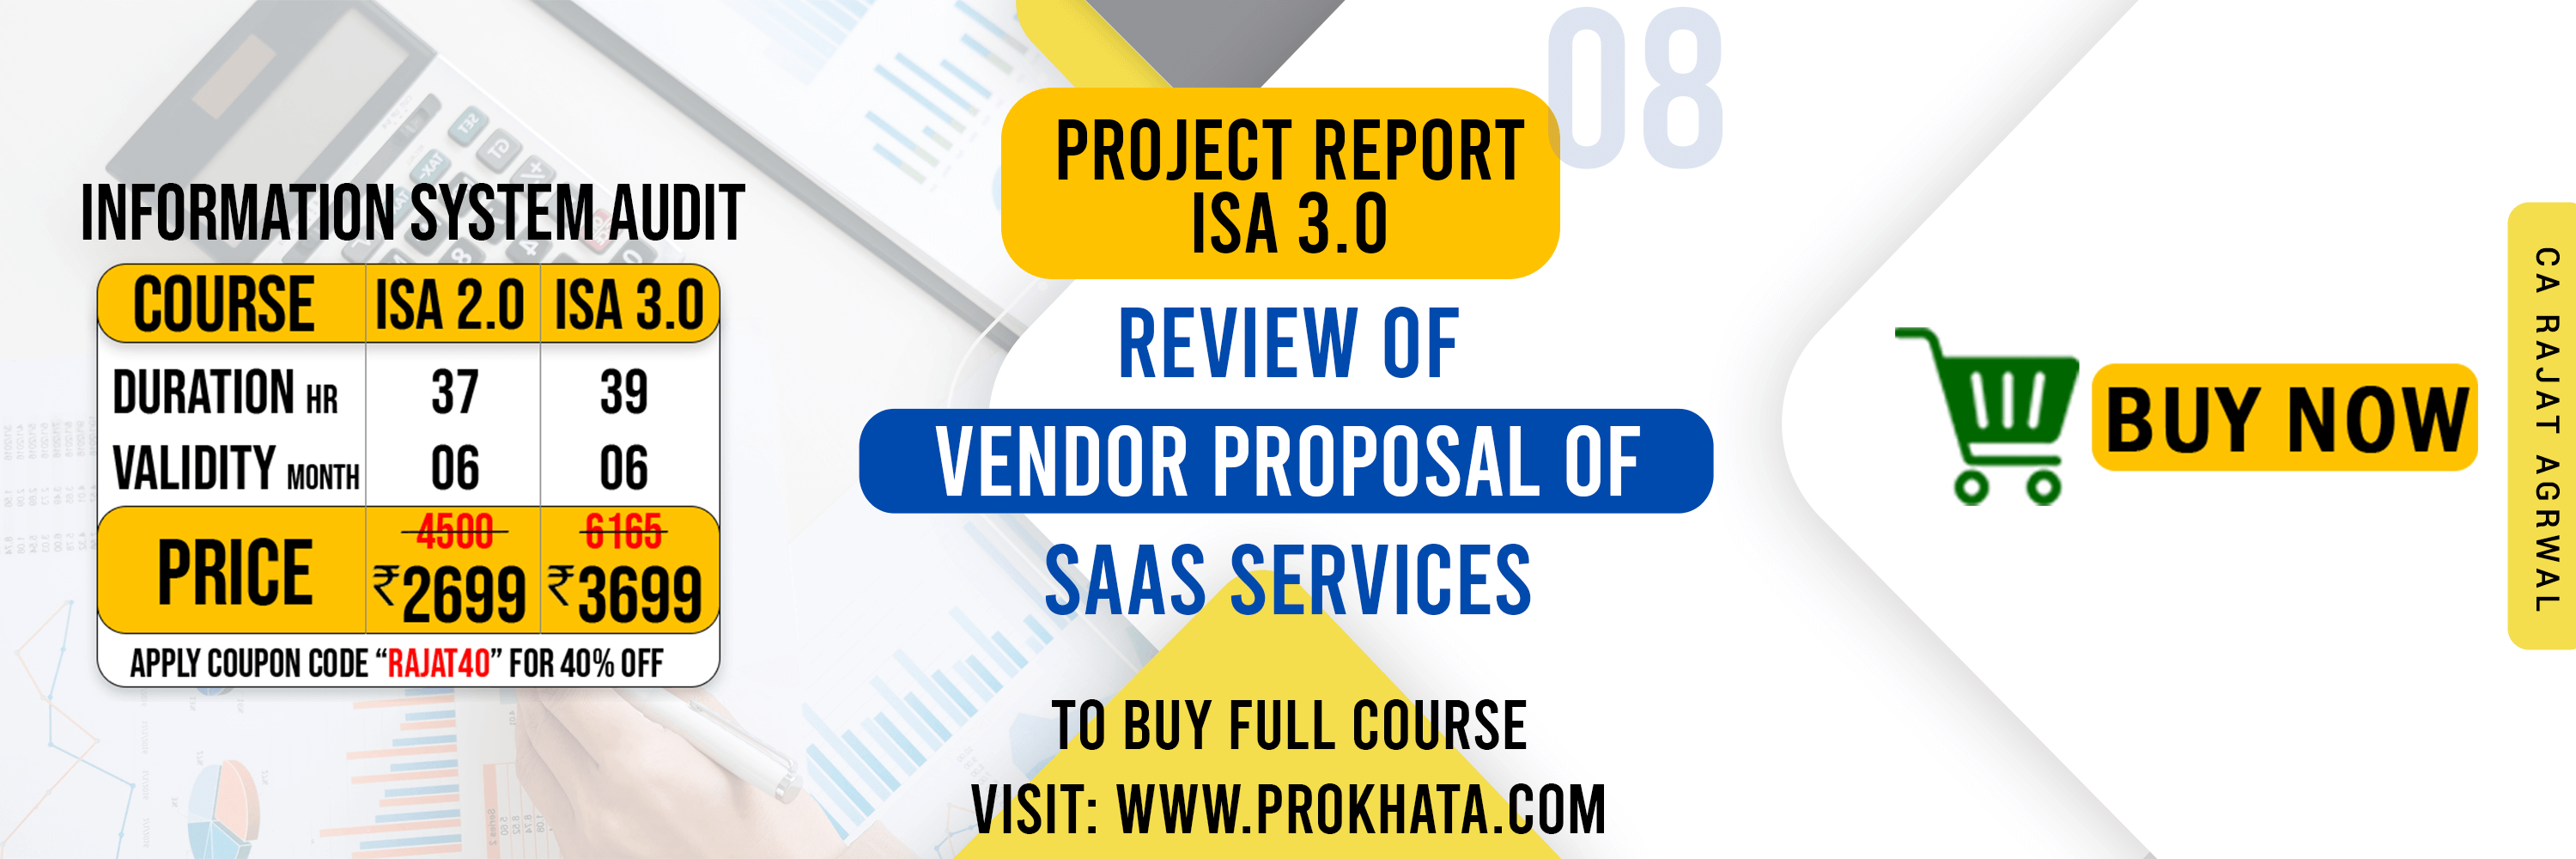 Project Report 08 Review of Vendor Proposal of Saas Services